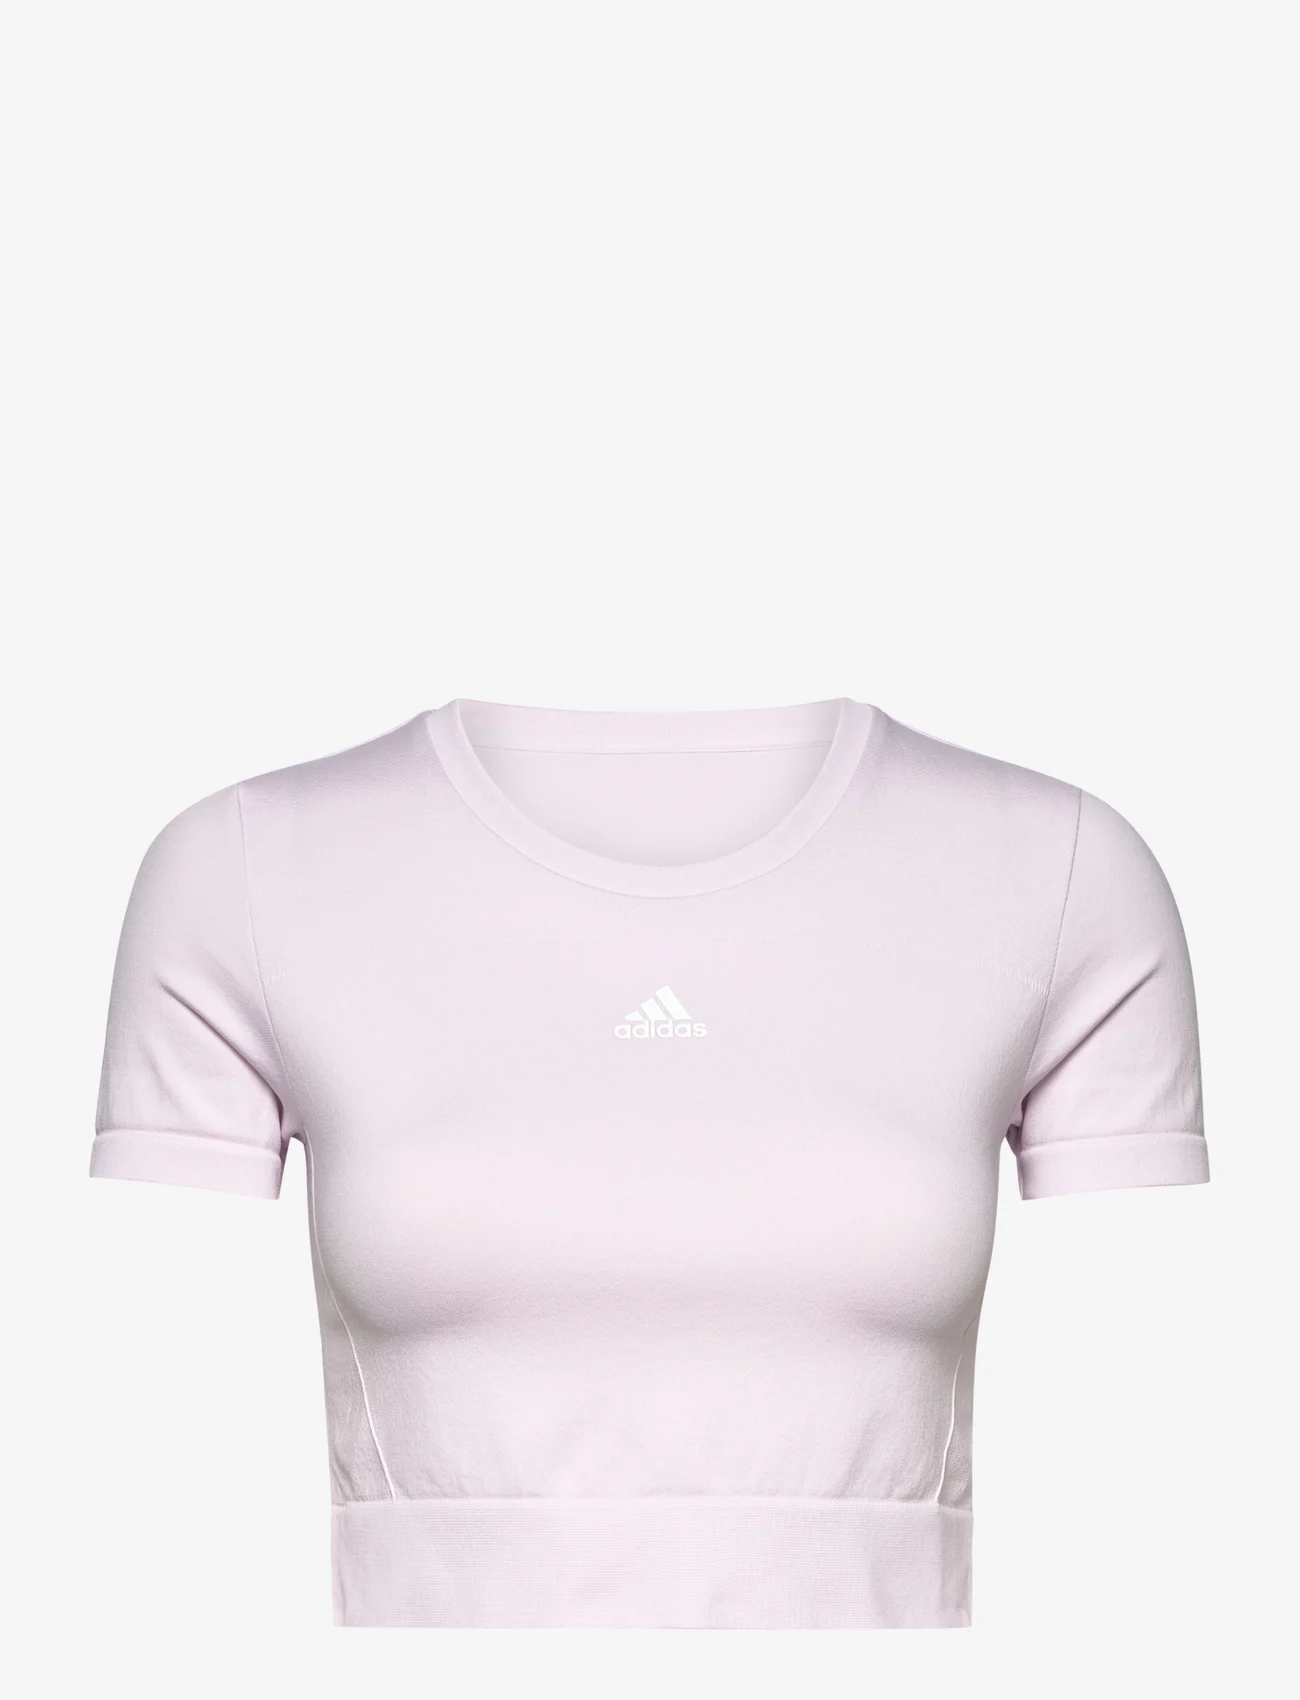 adidas Performance - AEROKNIT Seamless Fitted Cropped Tee W - lowest prices - almpnk/white - 0